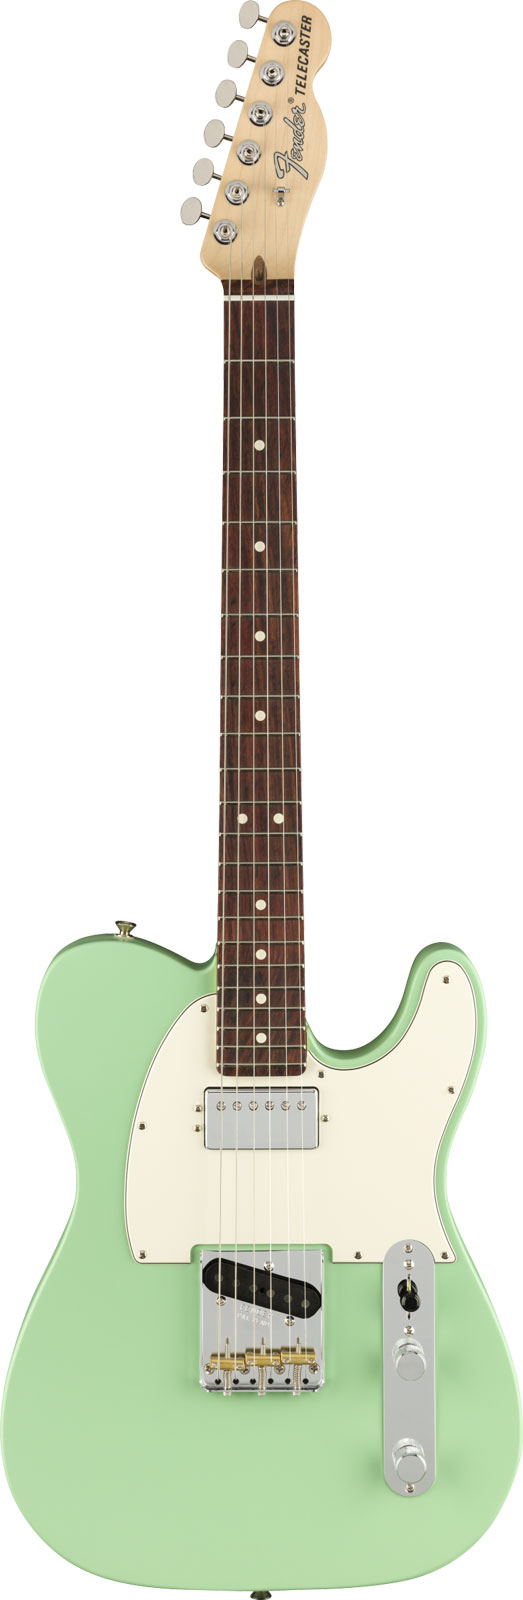 FENDER AMERICAN PERFORMER TELECASTER WITH HUMBUCKING RW, SATIN SURF GREEN